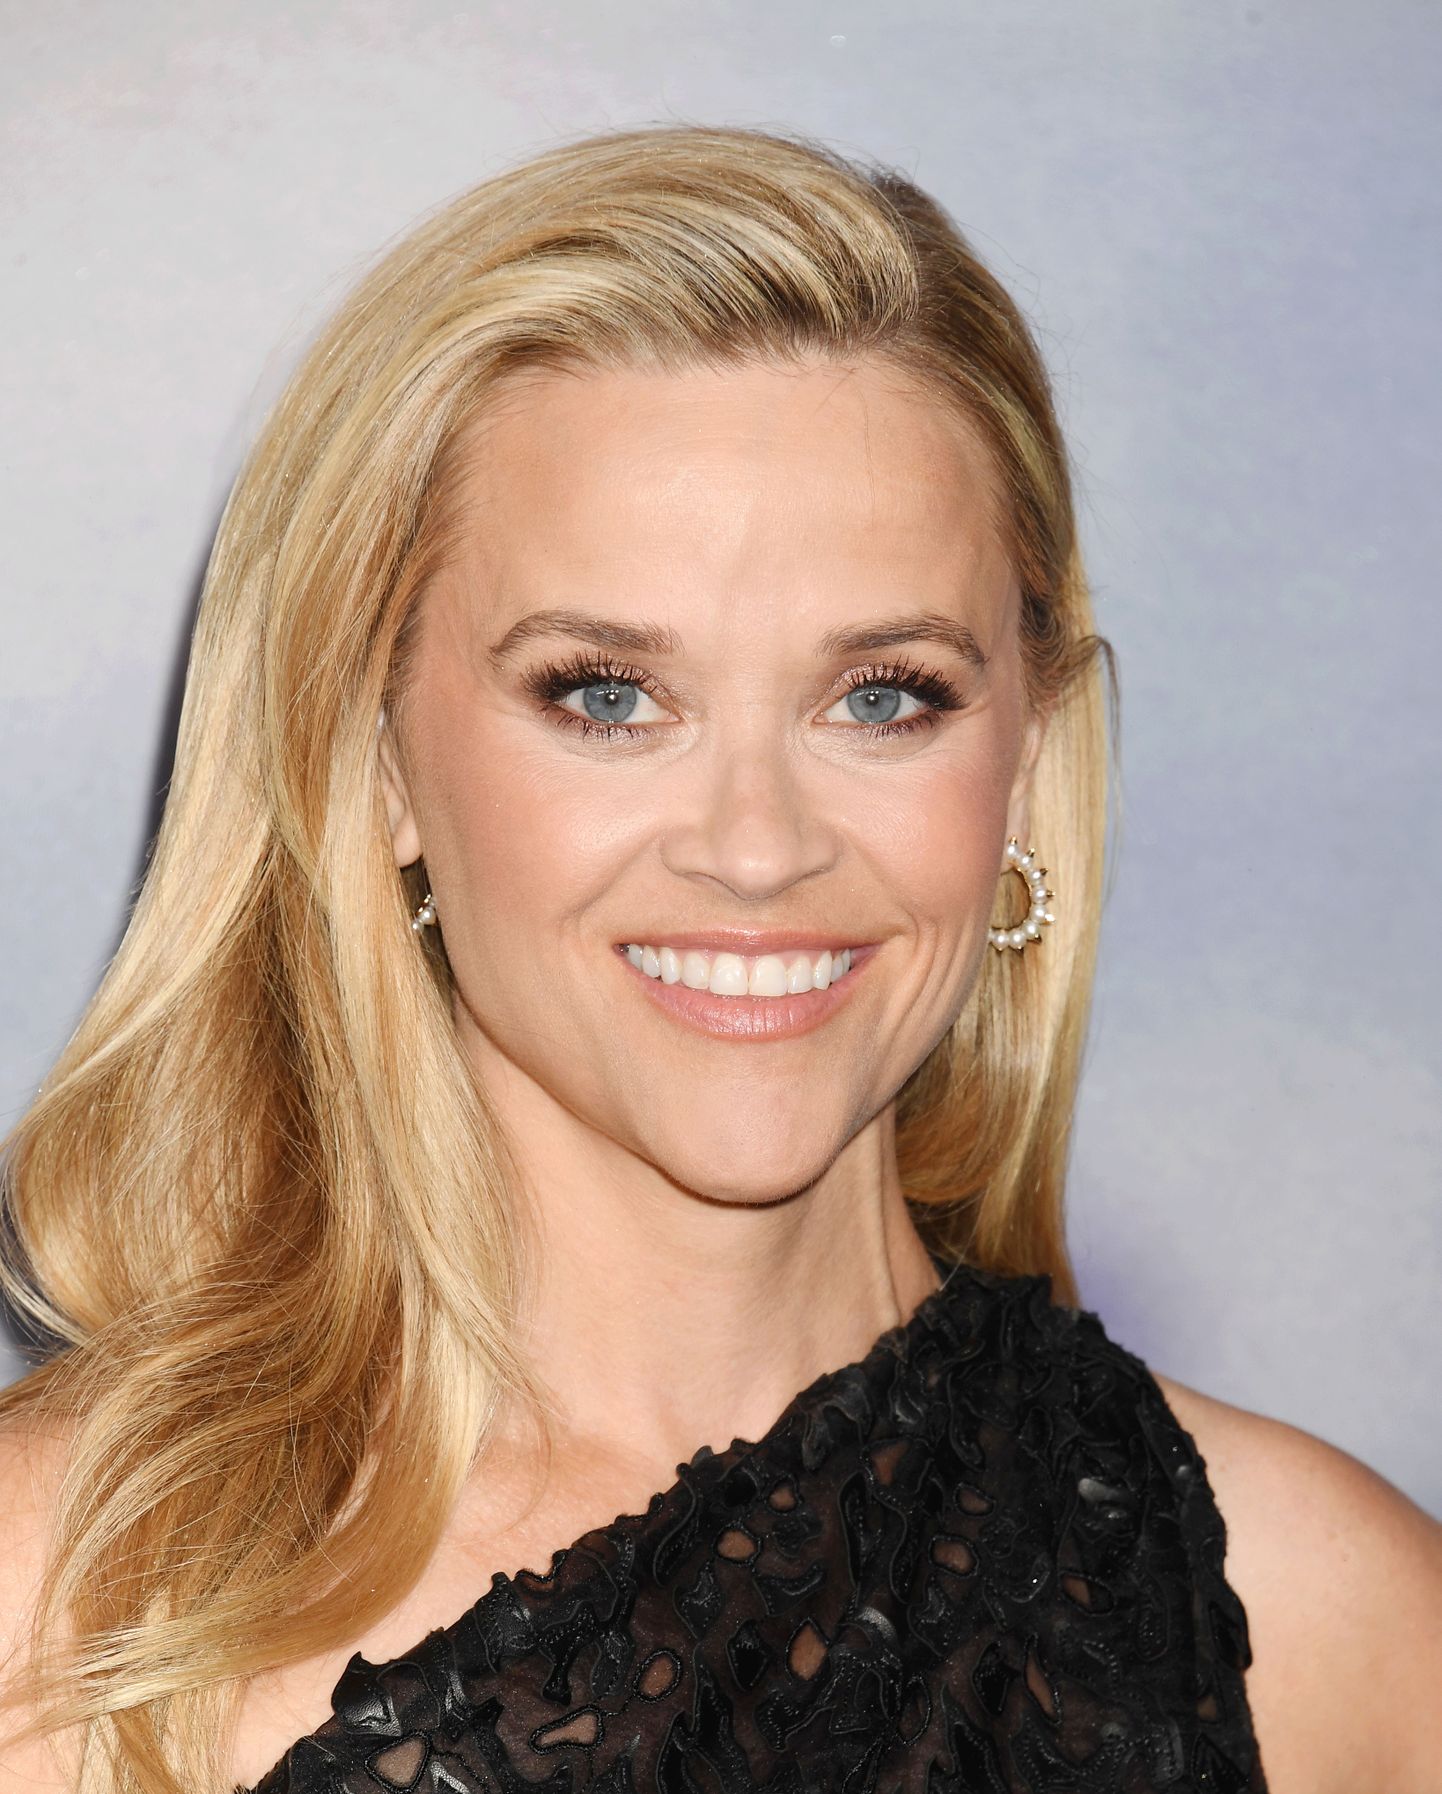 Reese Witherspoon.